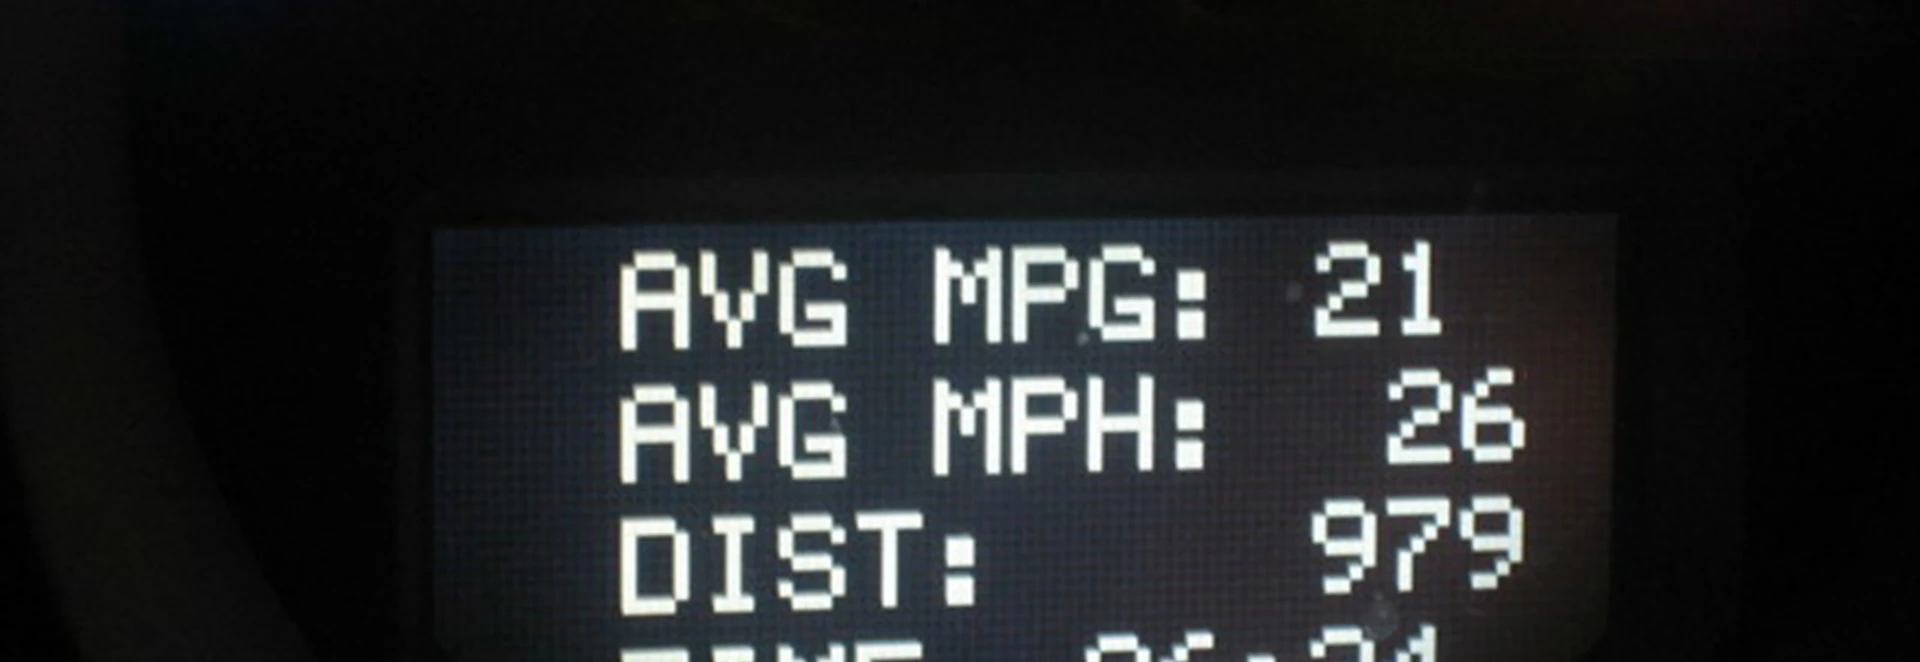 A guide to MPG figures 